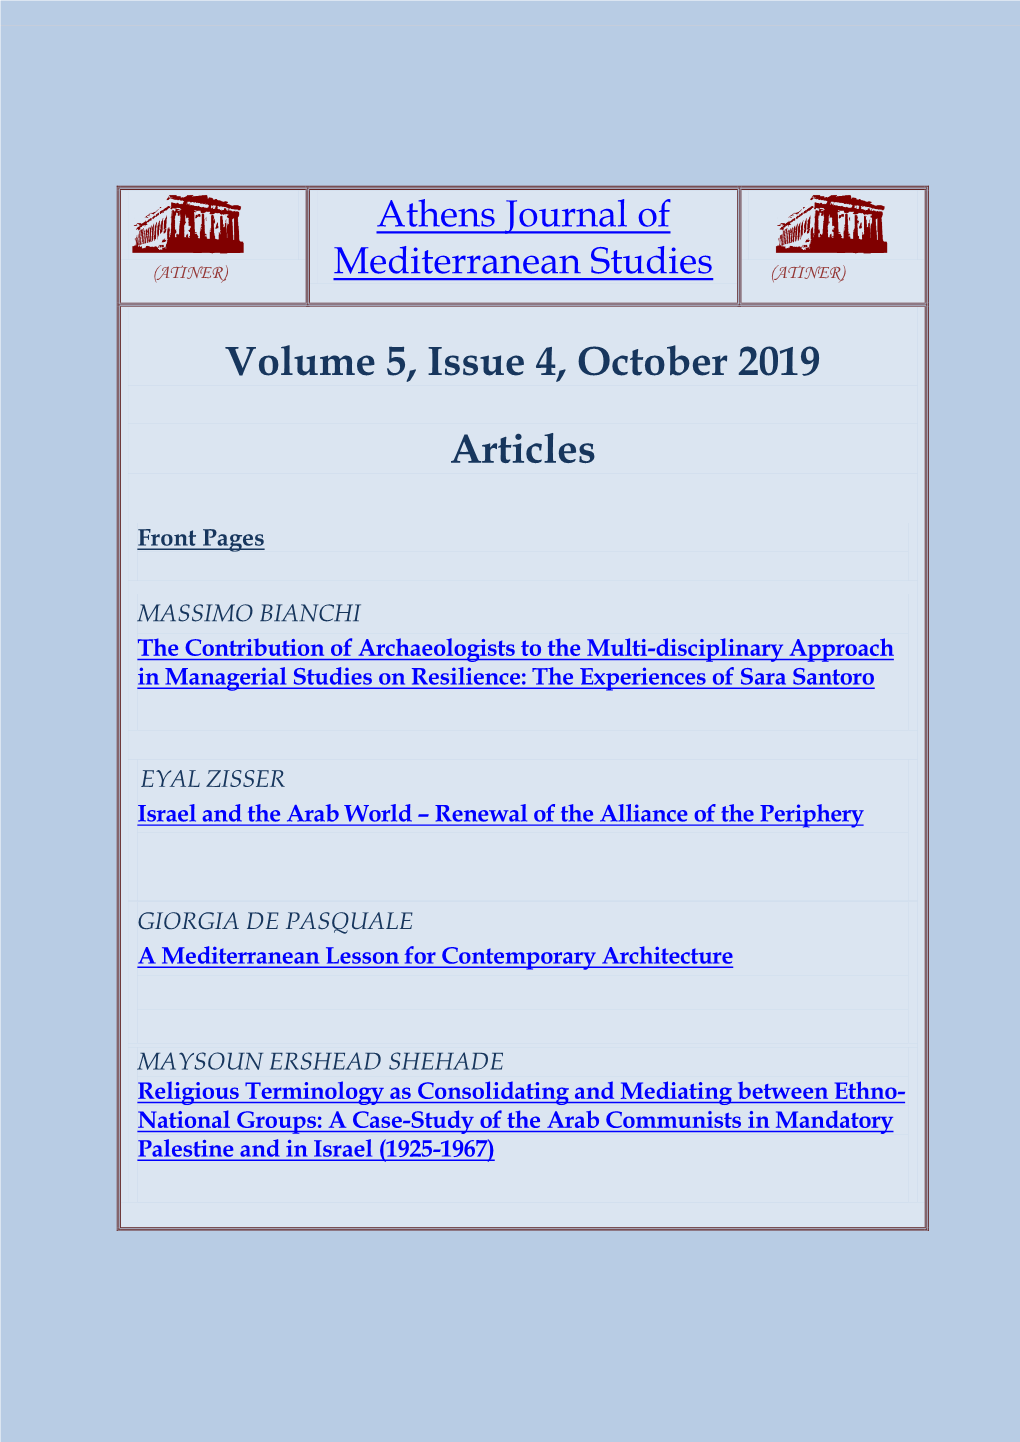 Volume 5, Issue 4, October 2019 Articles